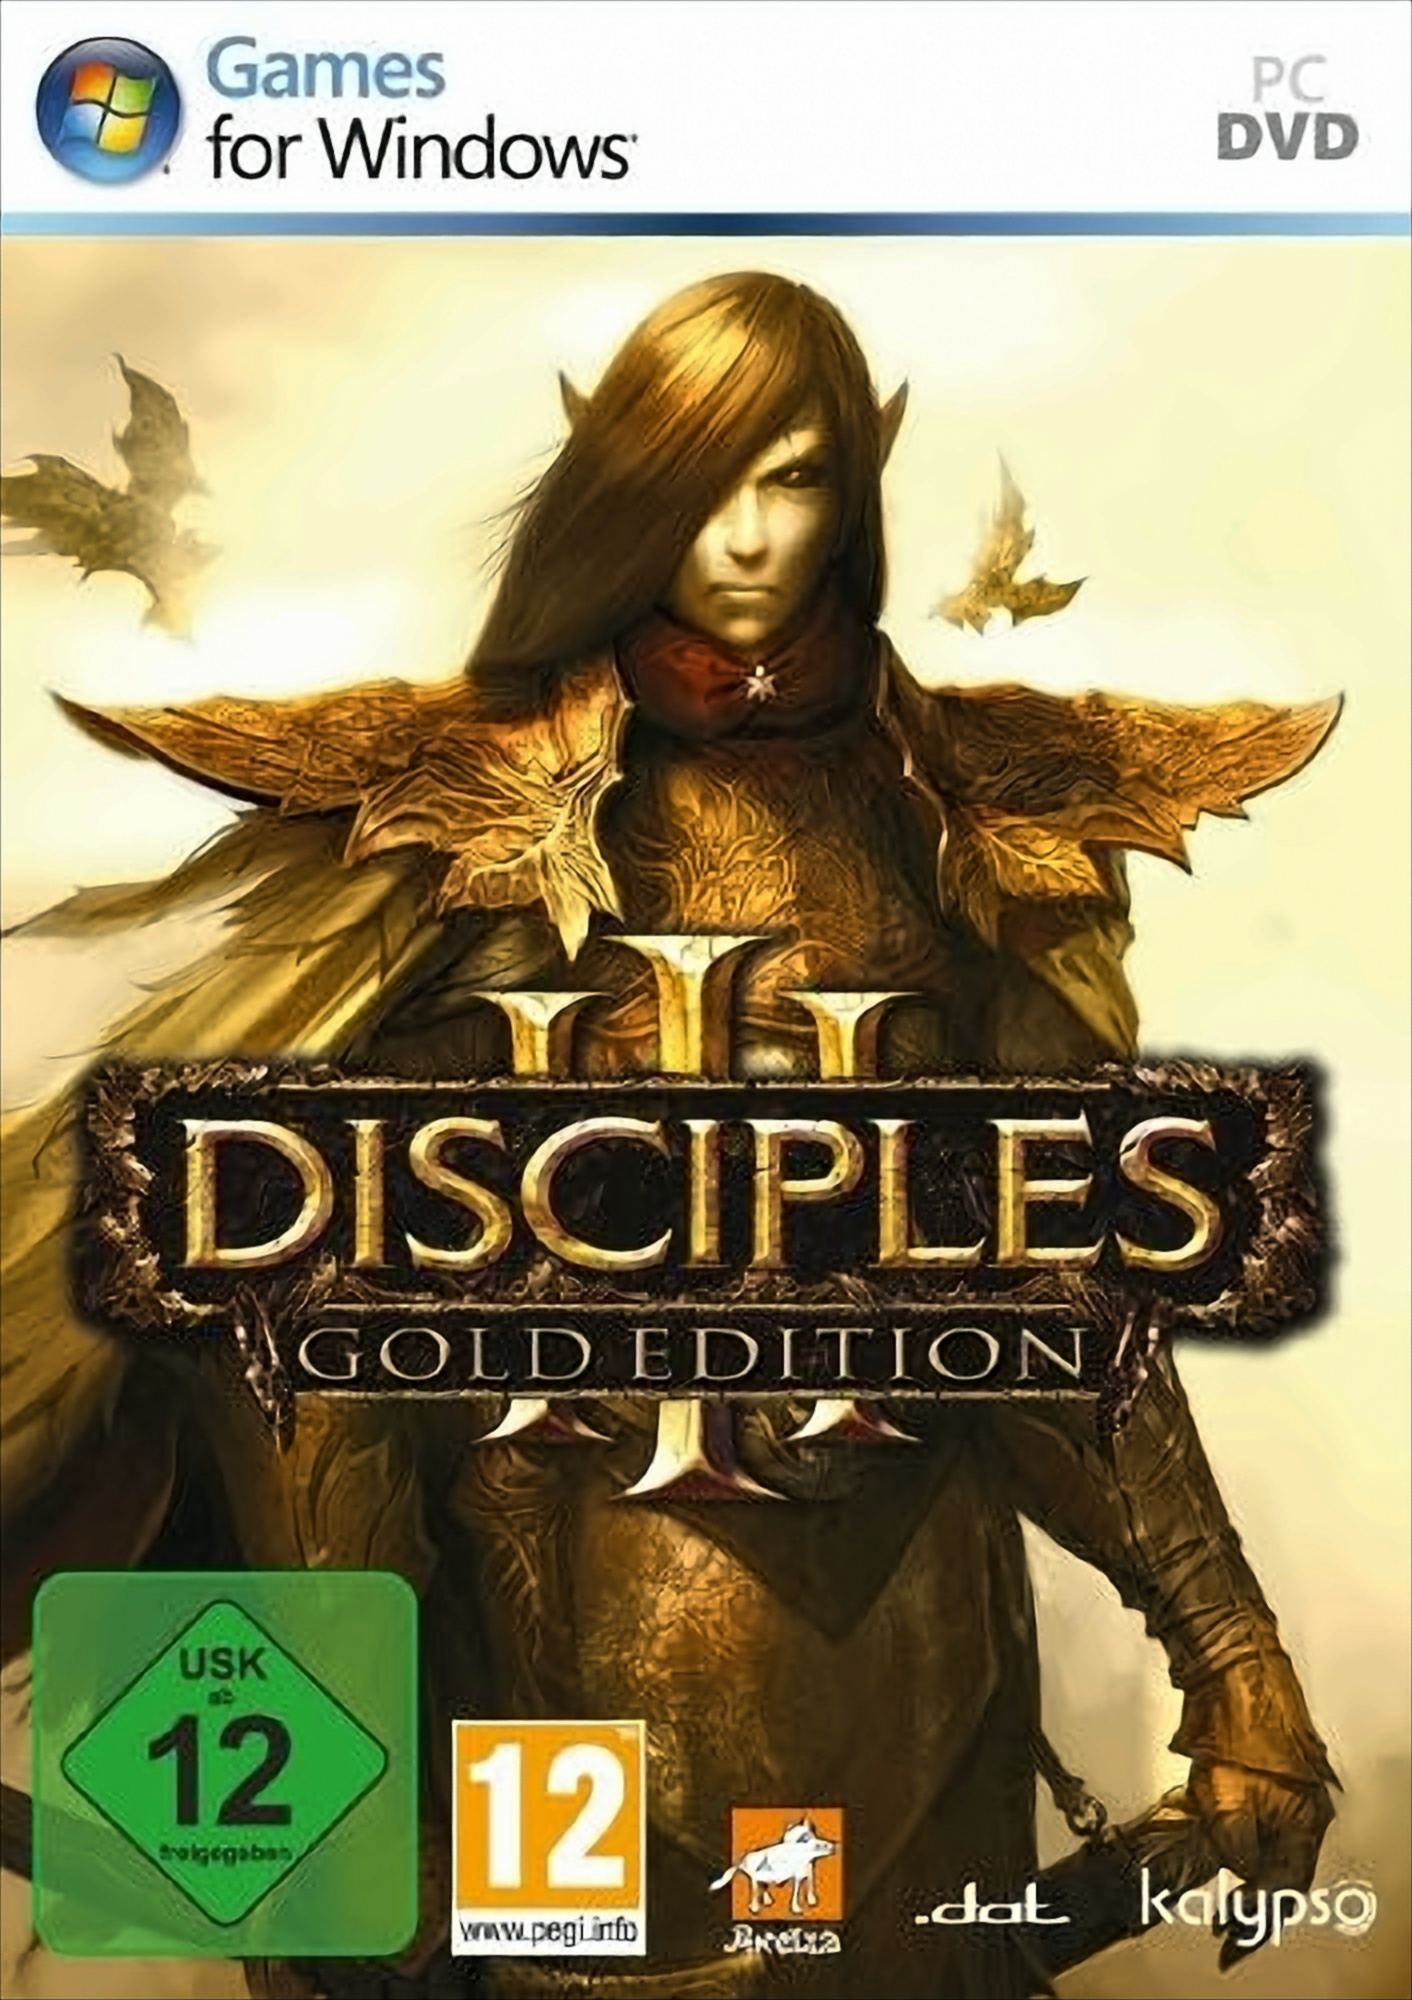 - - Edition III [PC] Gold Disciples